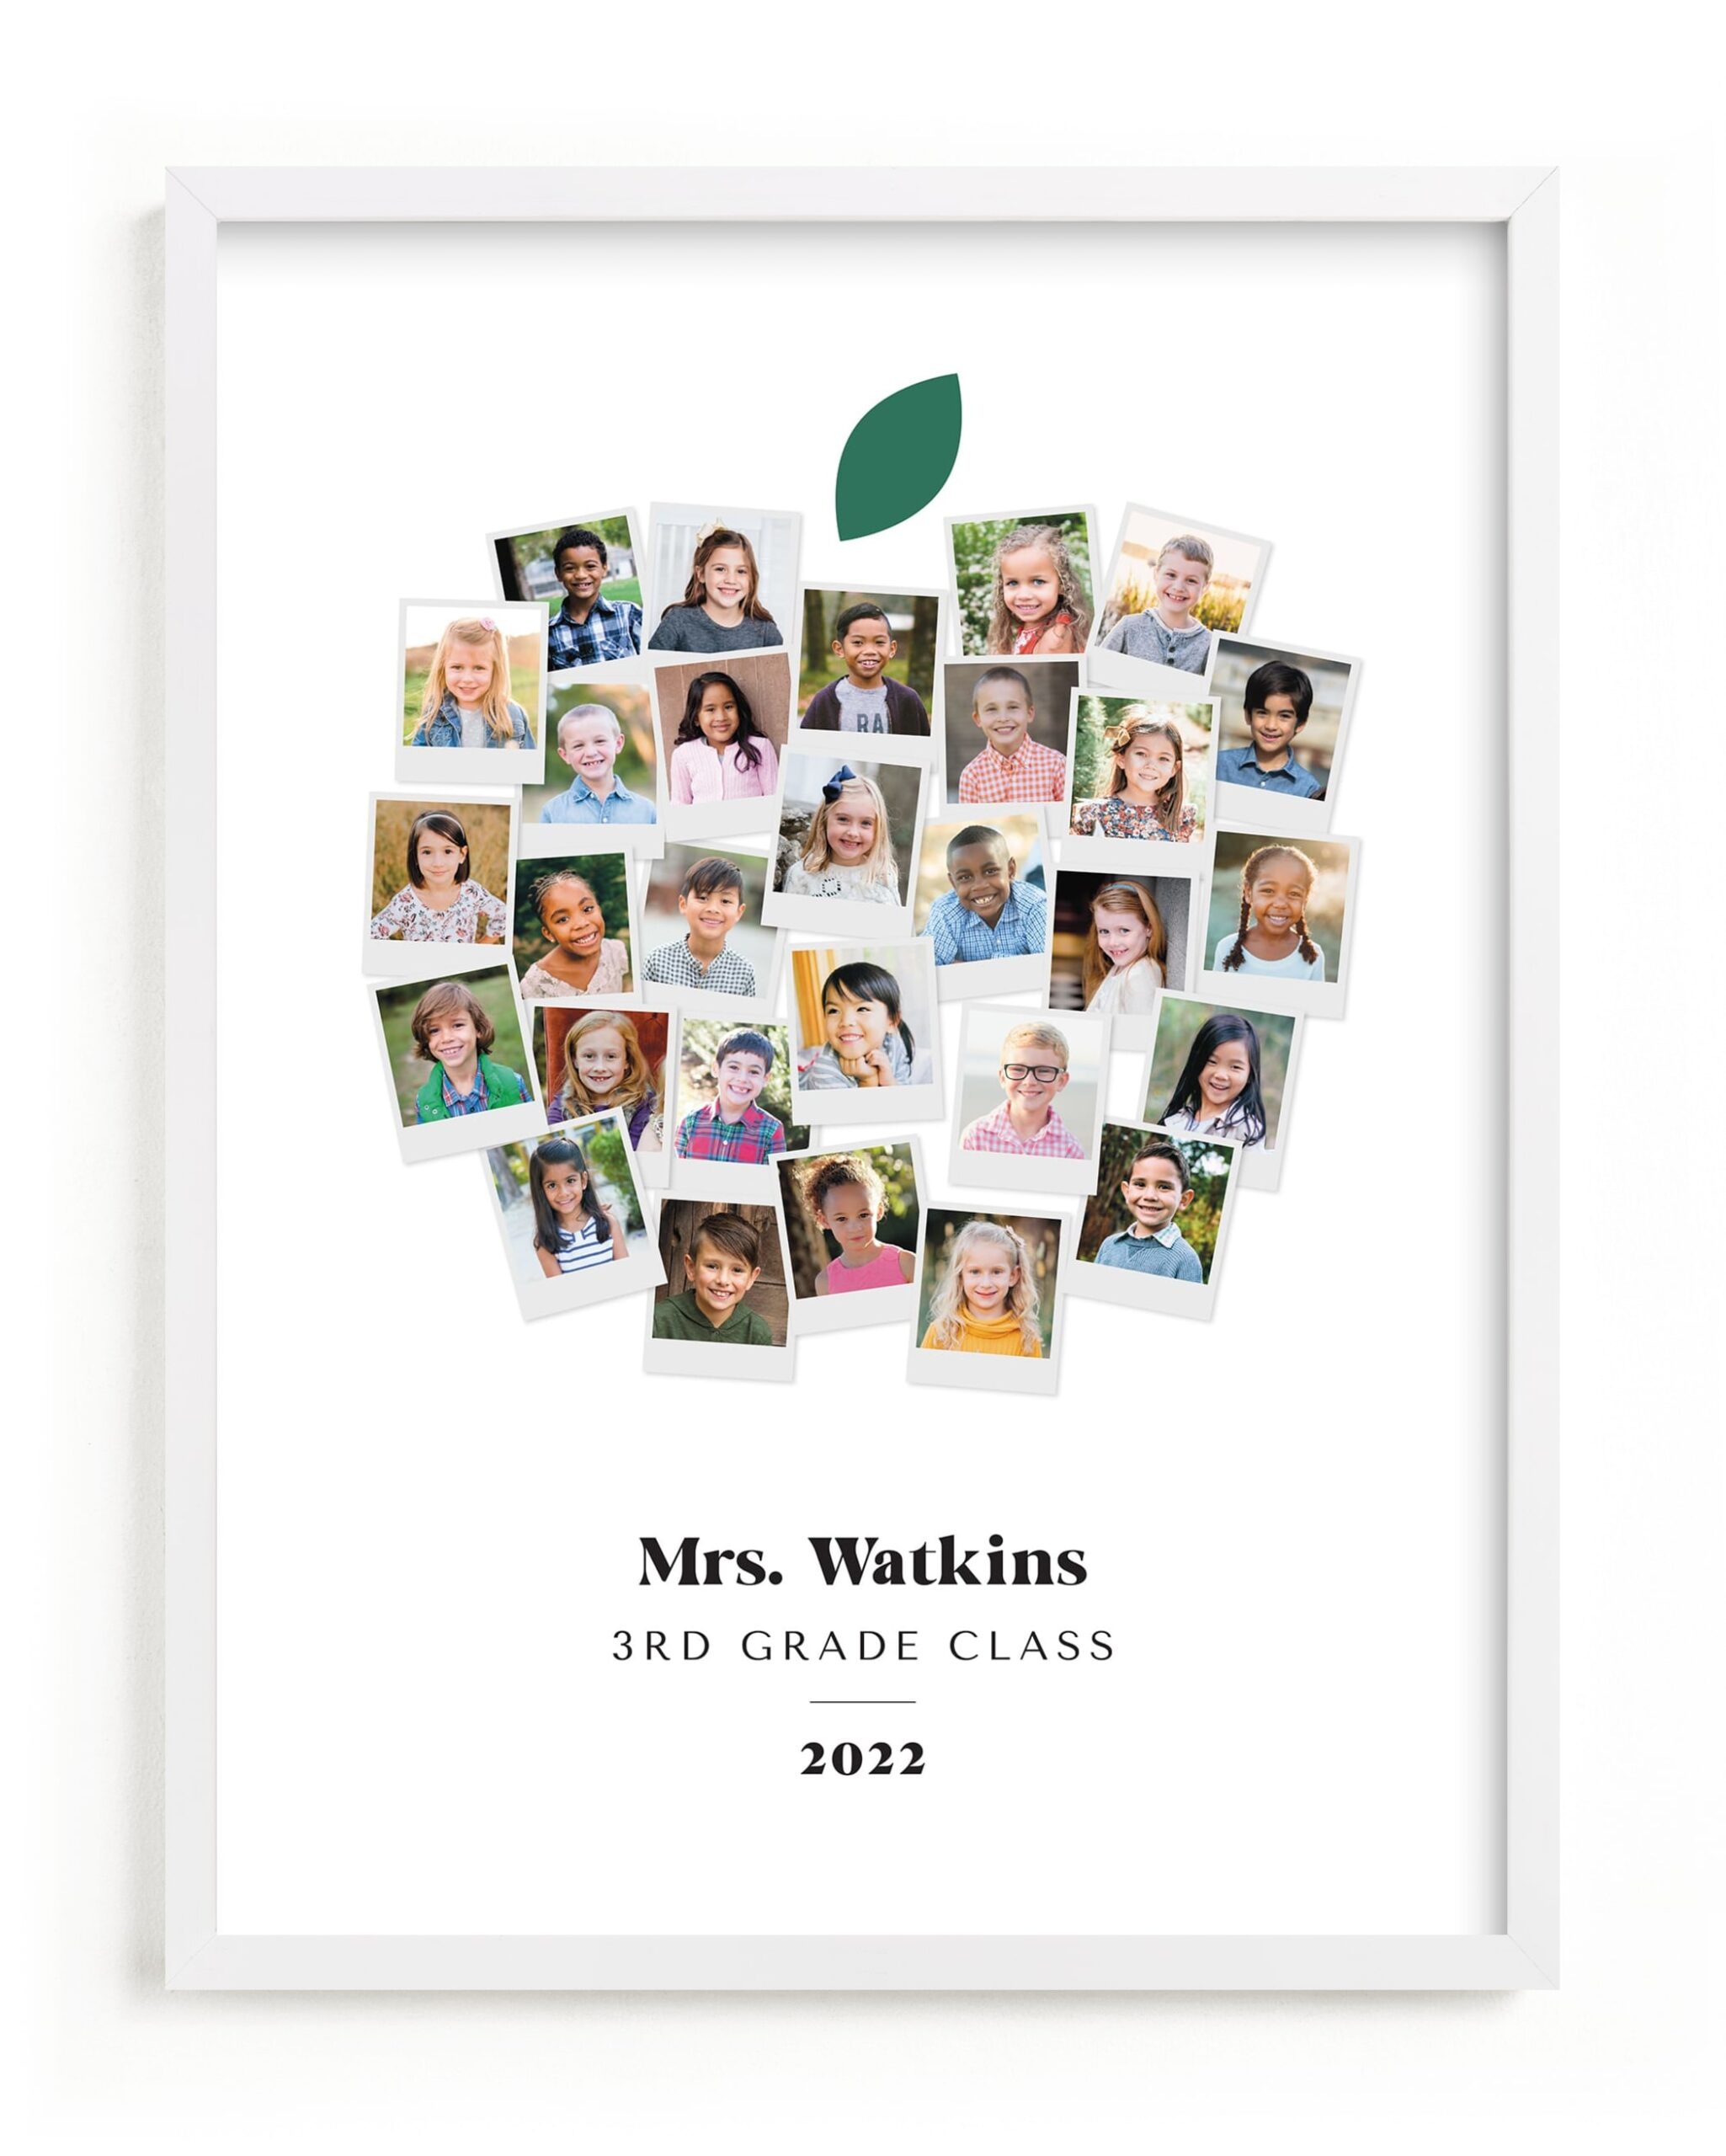 End of year teacher gift showing student photos in the shape of an apple